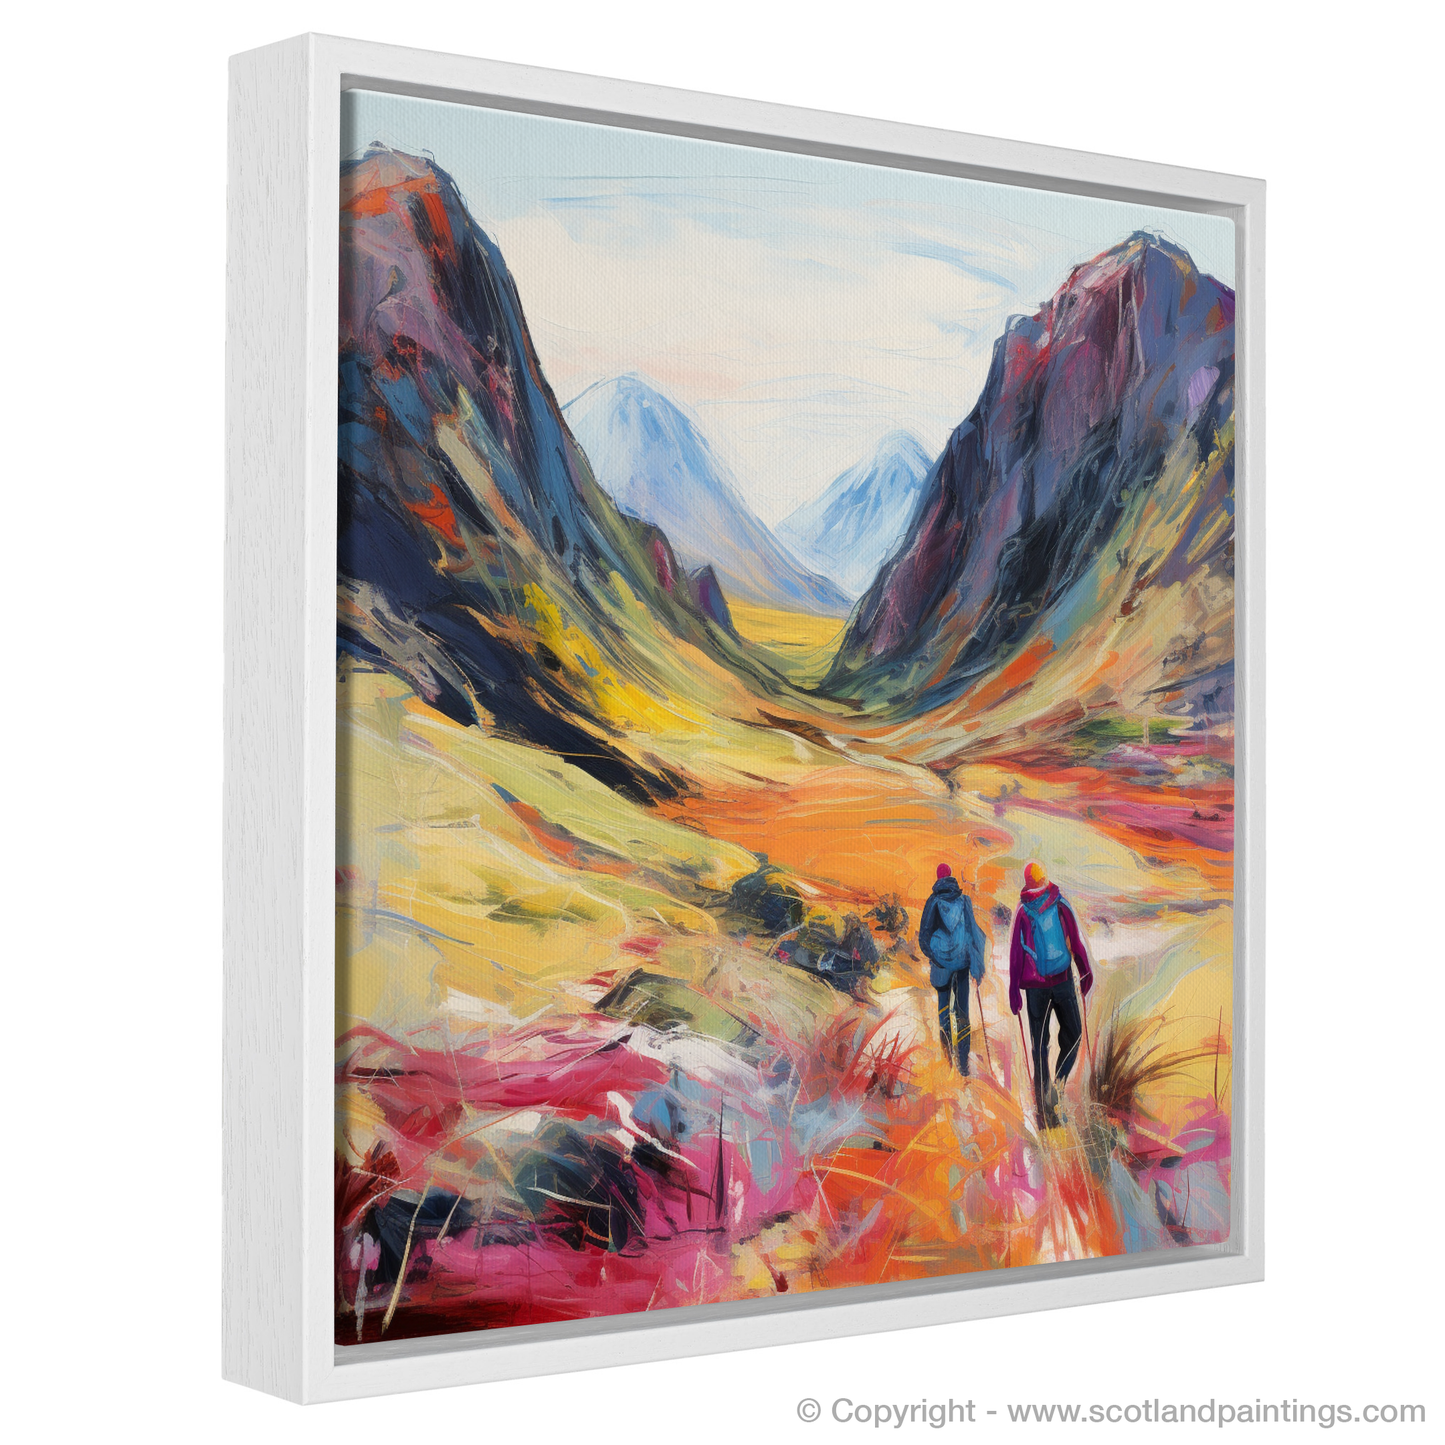 Painting and Art Print of Hikers in Glencoe entitled "Hikers' Odyssey Through Glencoe".